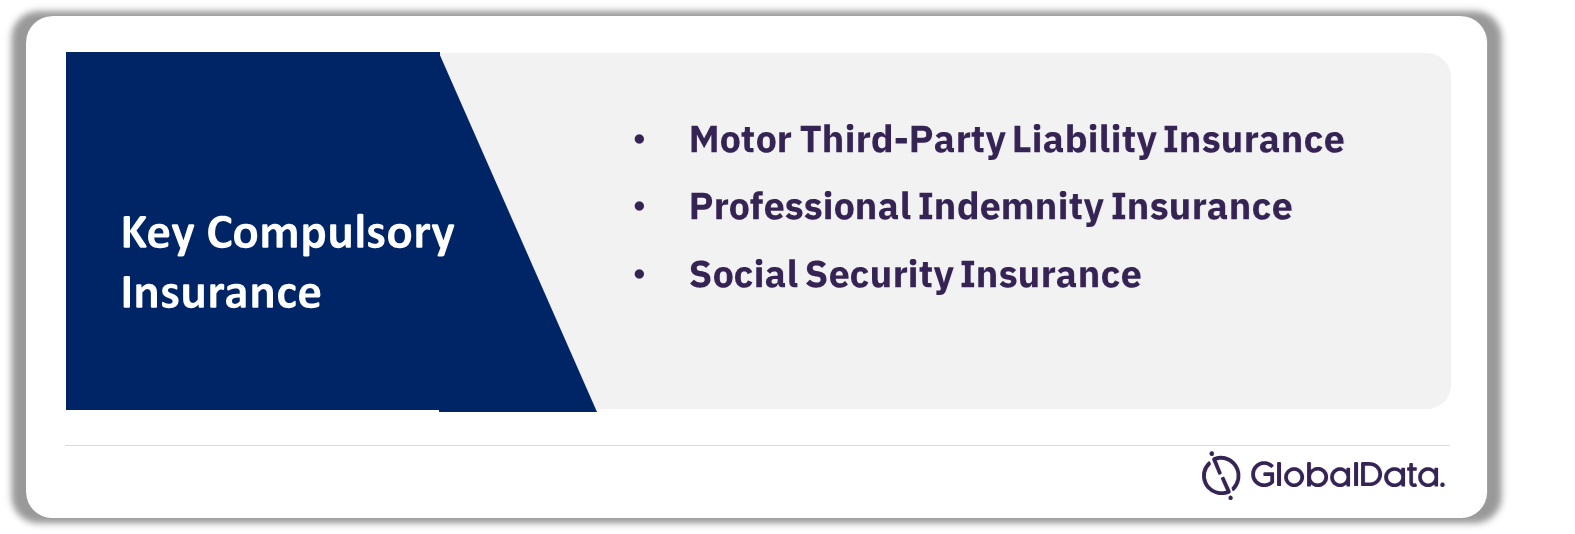 Timor-Leste Insurance Industry Analysis by Compulsory Insurances